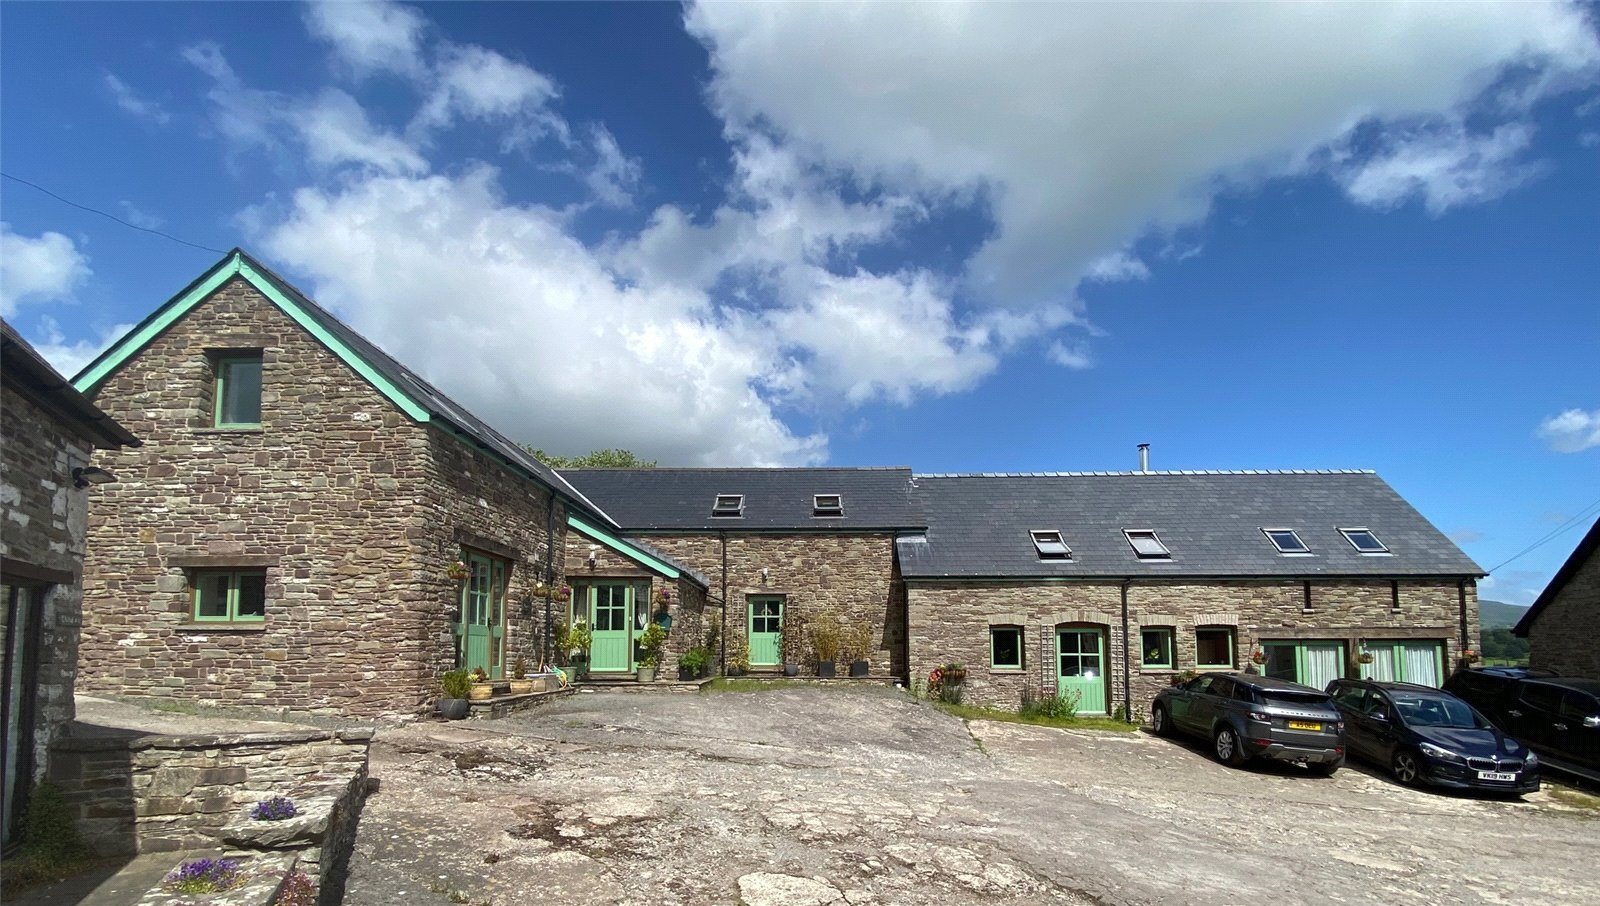 5 bedroom barn conversion for sale in powys